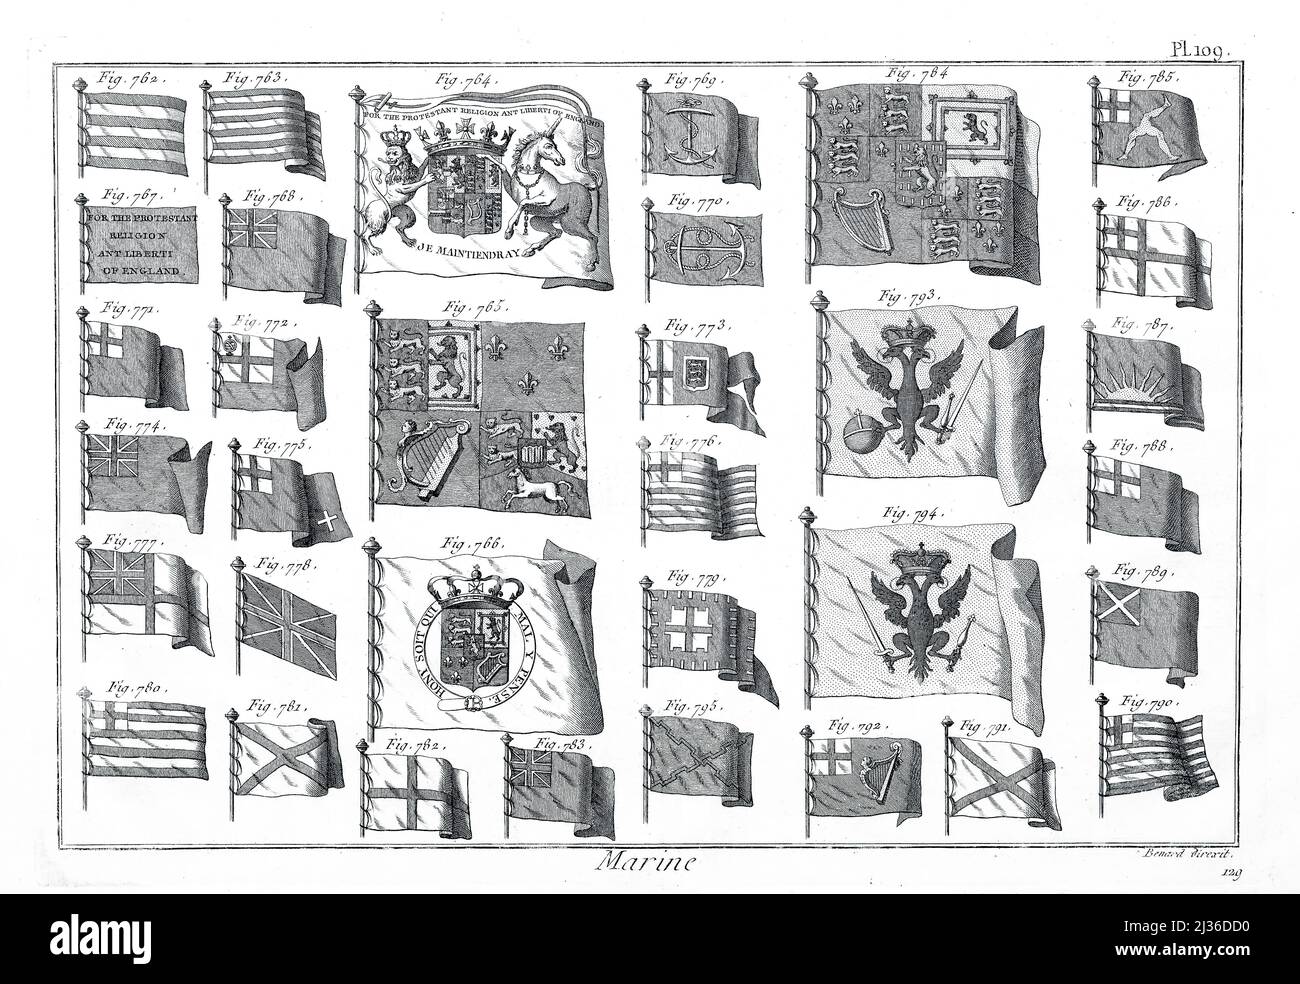 Maritime Flags and banners From the Encyclopédie méthodique Maritime Encyclopedia Publisher Paris : Panckoucke ; Liège : Plomteux in 1787 containing drawings and blueprints of shipbuilding,  and Illustrations of maritime subjects plates drawn by Benard direxit Stock Photo